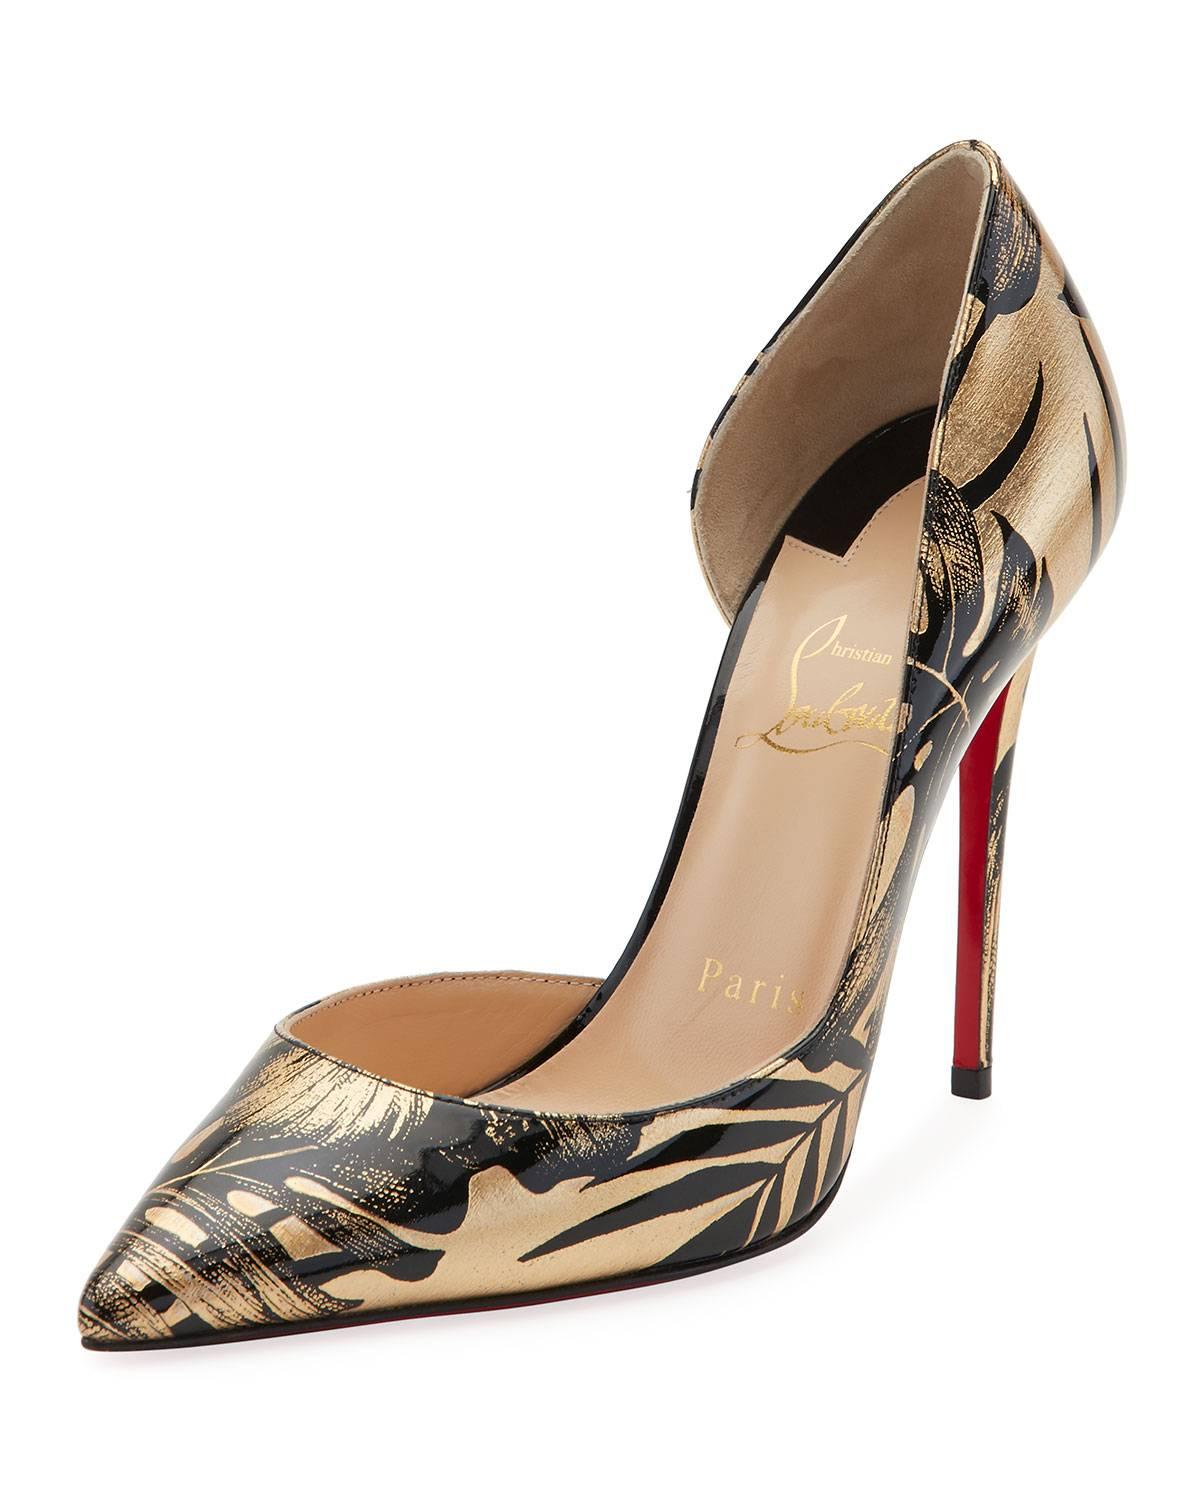 CURATOR'S NOTES

Christian Louboutin New Black Gold Patent D'orsay Evening Sandals Heels in Box  

Size IT 36
Patent leather
Slip on 
Made in Italy
Heel height 4"
Includes original Christian Louboutin box